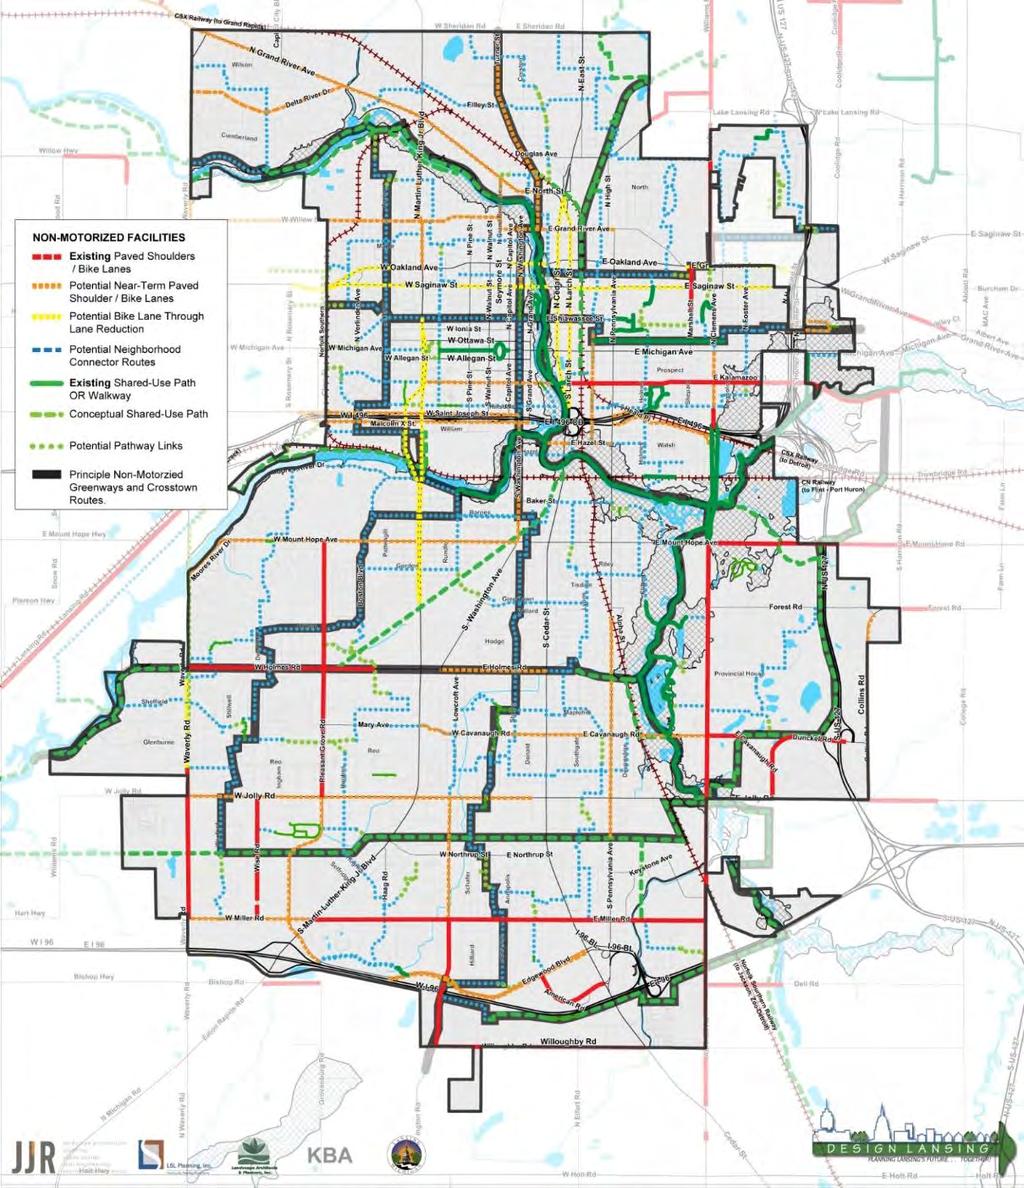 City of Lansing The City of Lansing Non-Motorized Plan includes a vision for establishing a walking and bicycling network that links to a regional nonmotorized system.